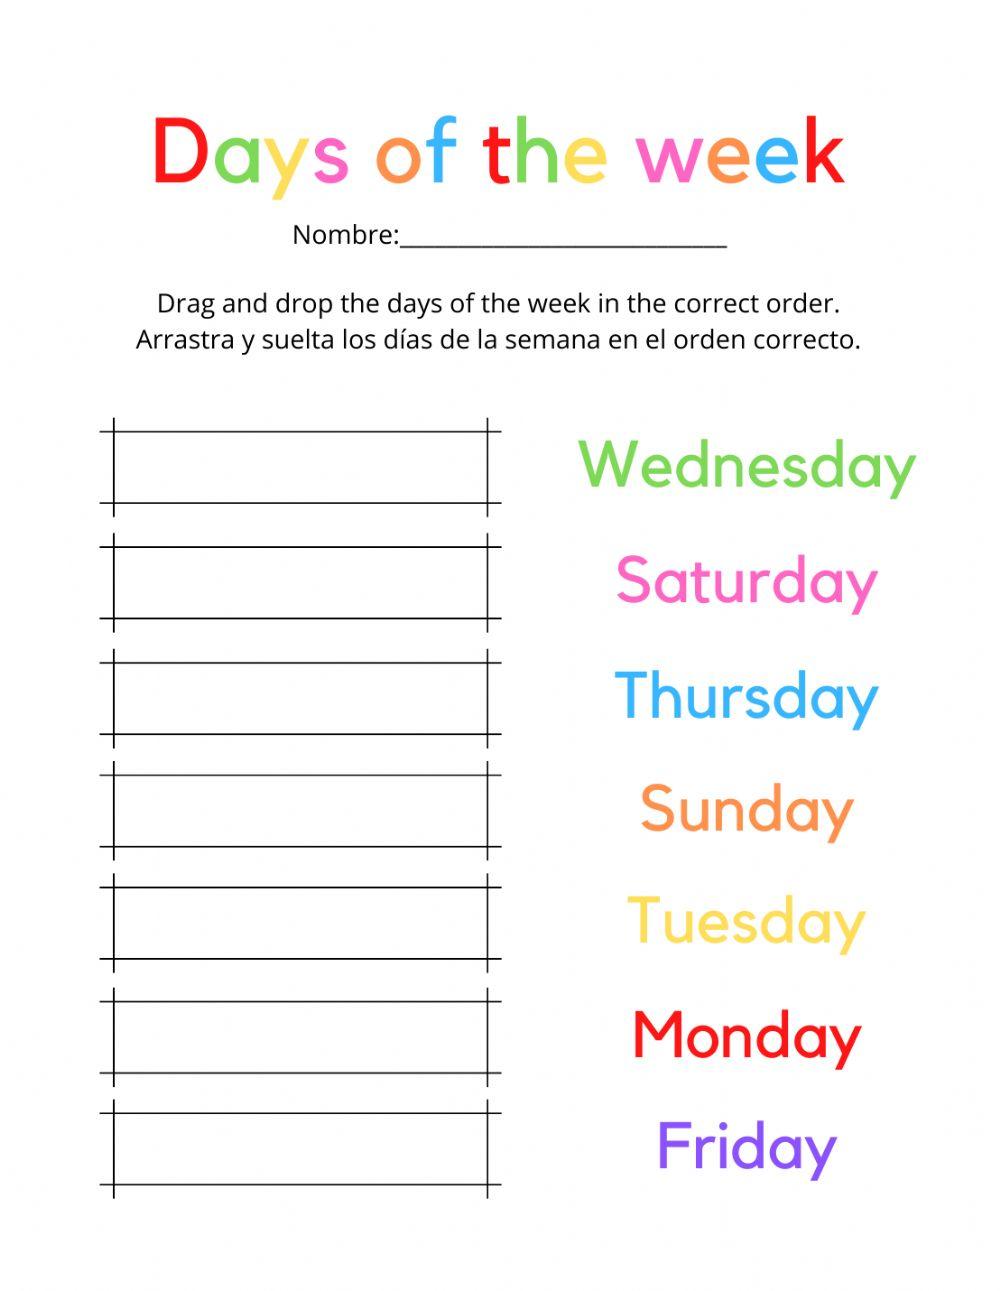 Days of the week & Months of the year